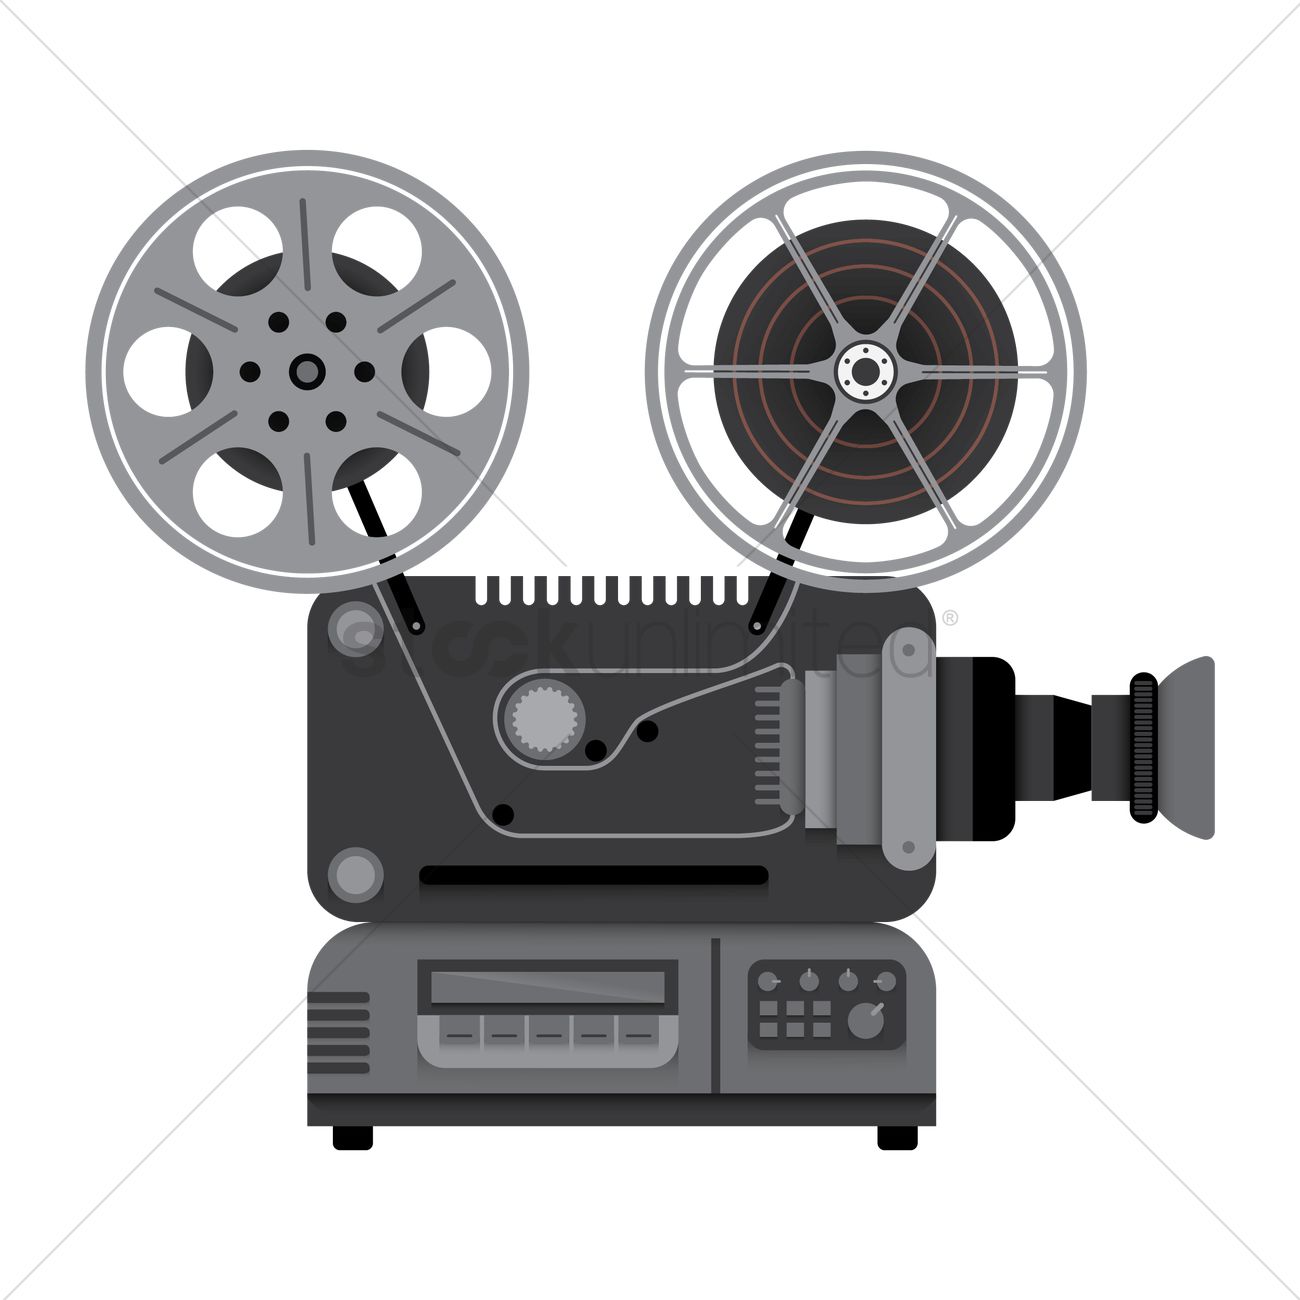 use neofinder to catalog documentary films